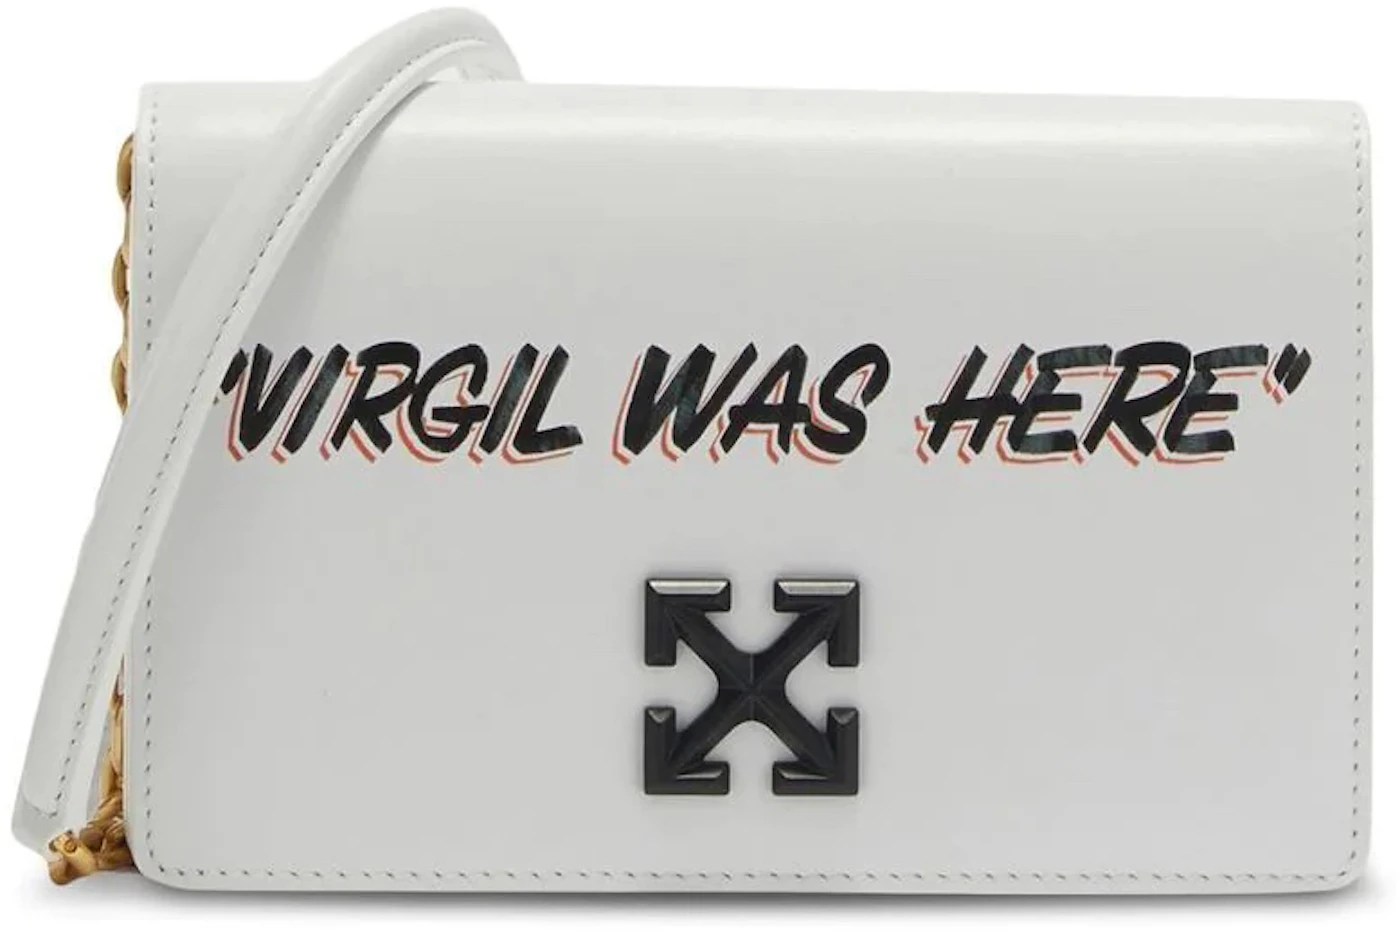 OFF-WHITE 1.4 Jitney Bag CASH INSIDE Black White in Leather with  Silver-tone - US